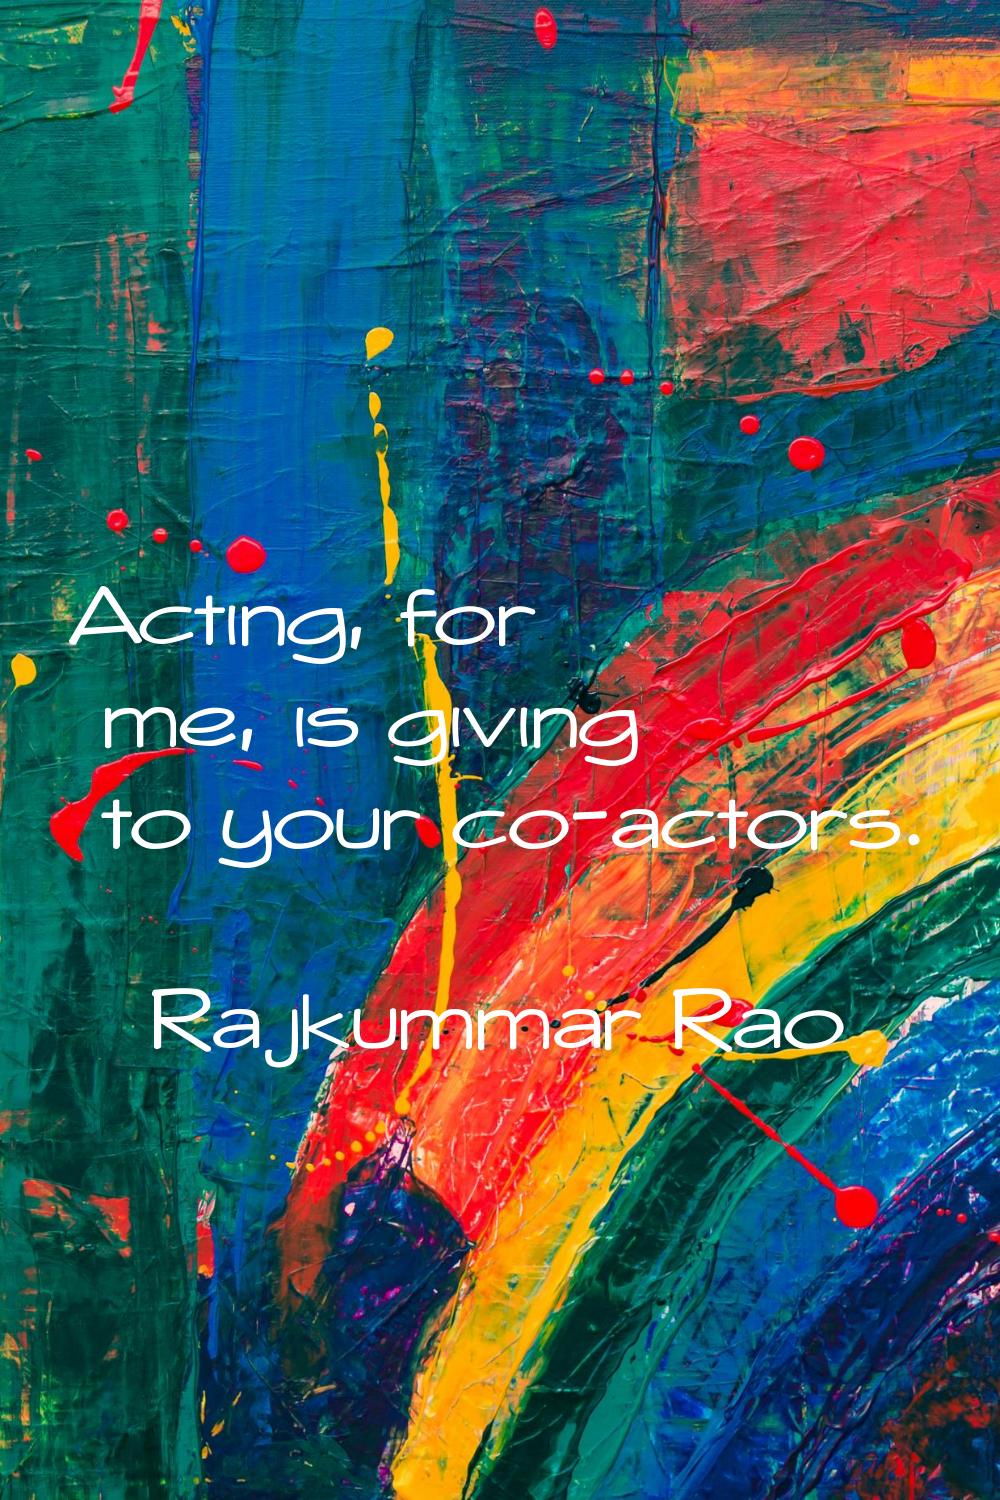 Acting, for me, is giving to your co-actors.